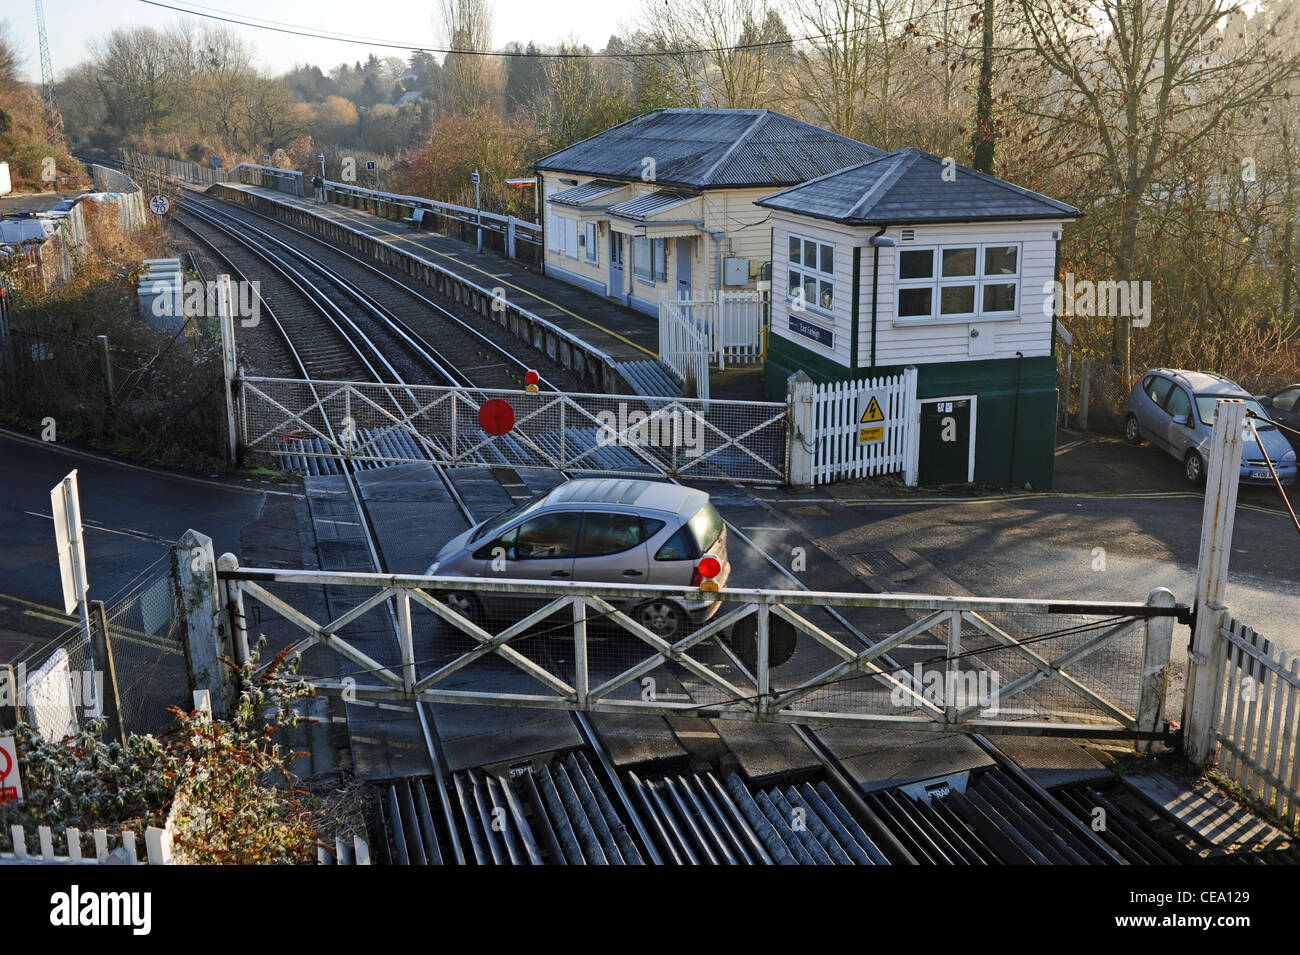 The old fashioned style railway line level crossing at the small village of East Farleigh in Kent UK Stock Photo